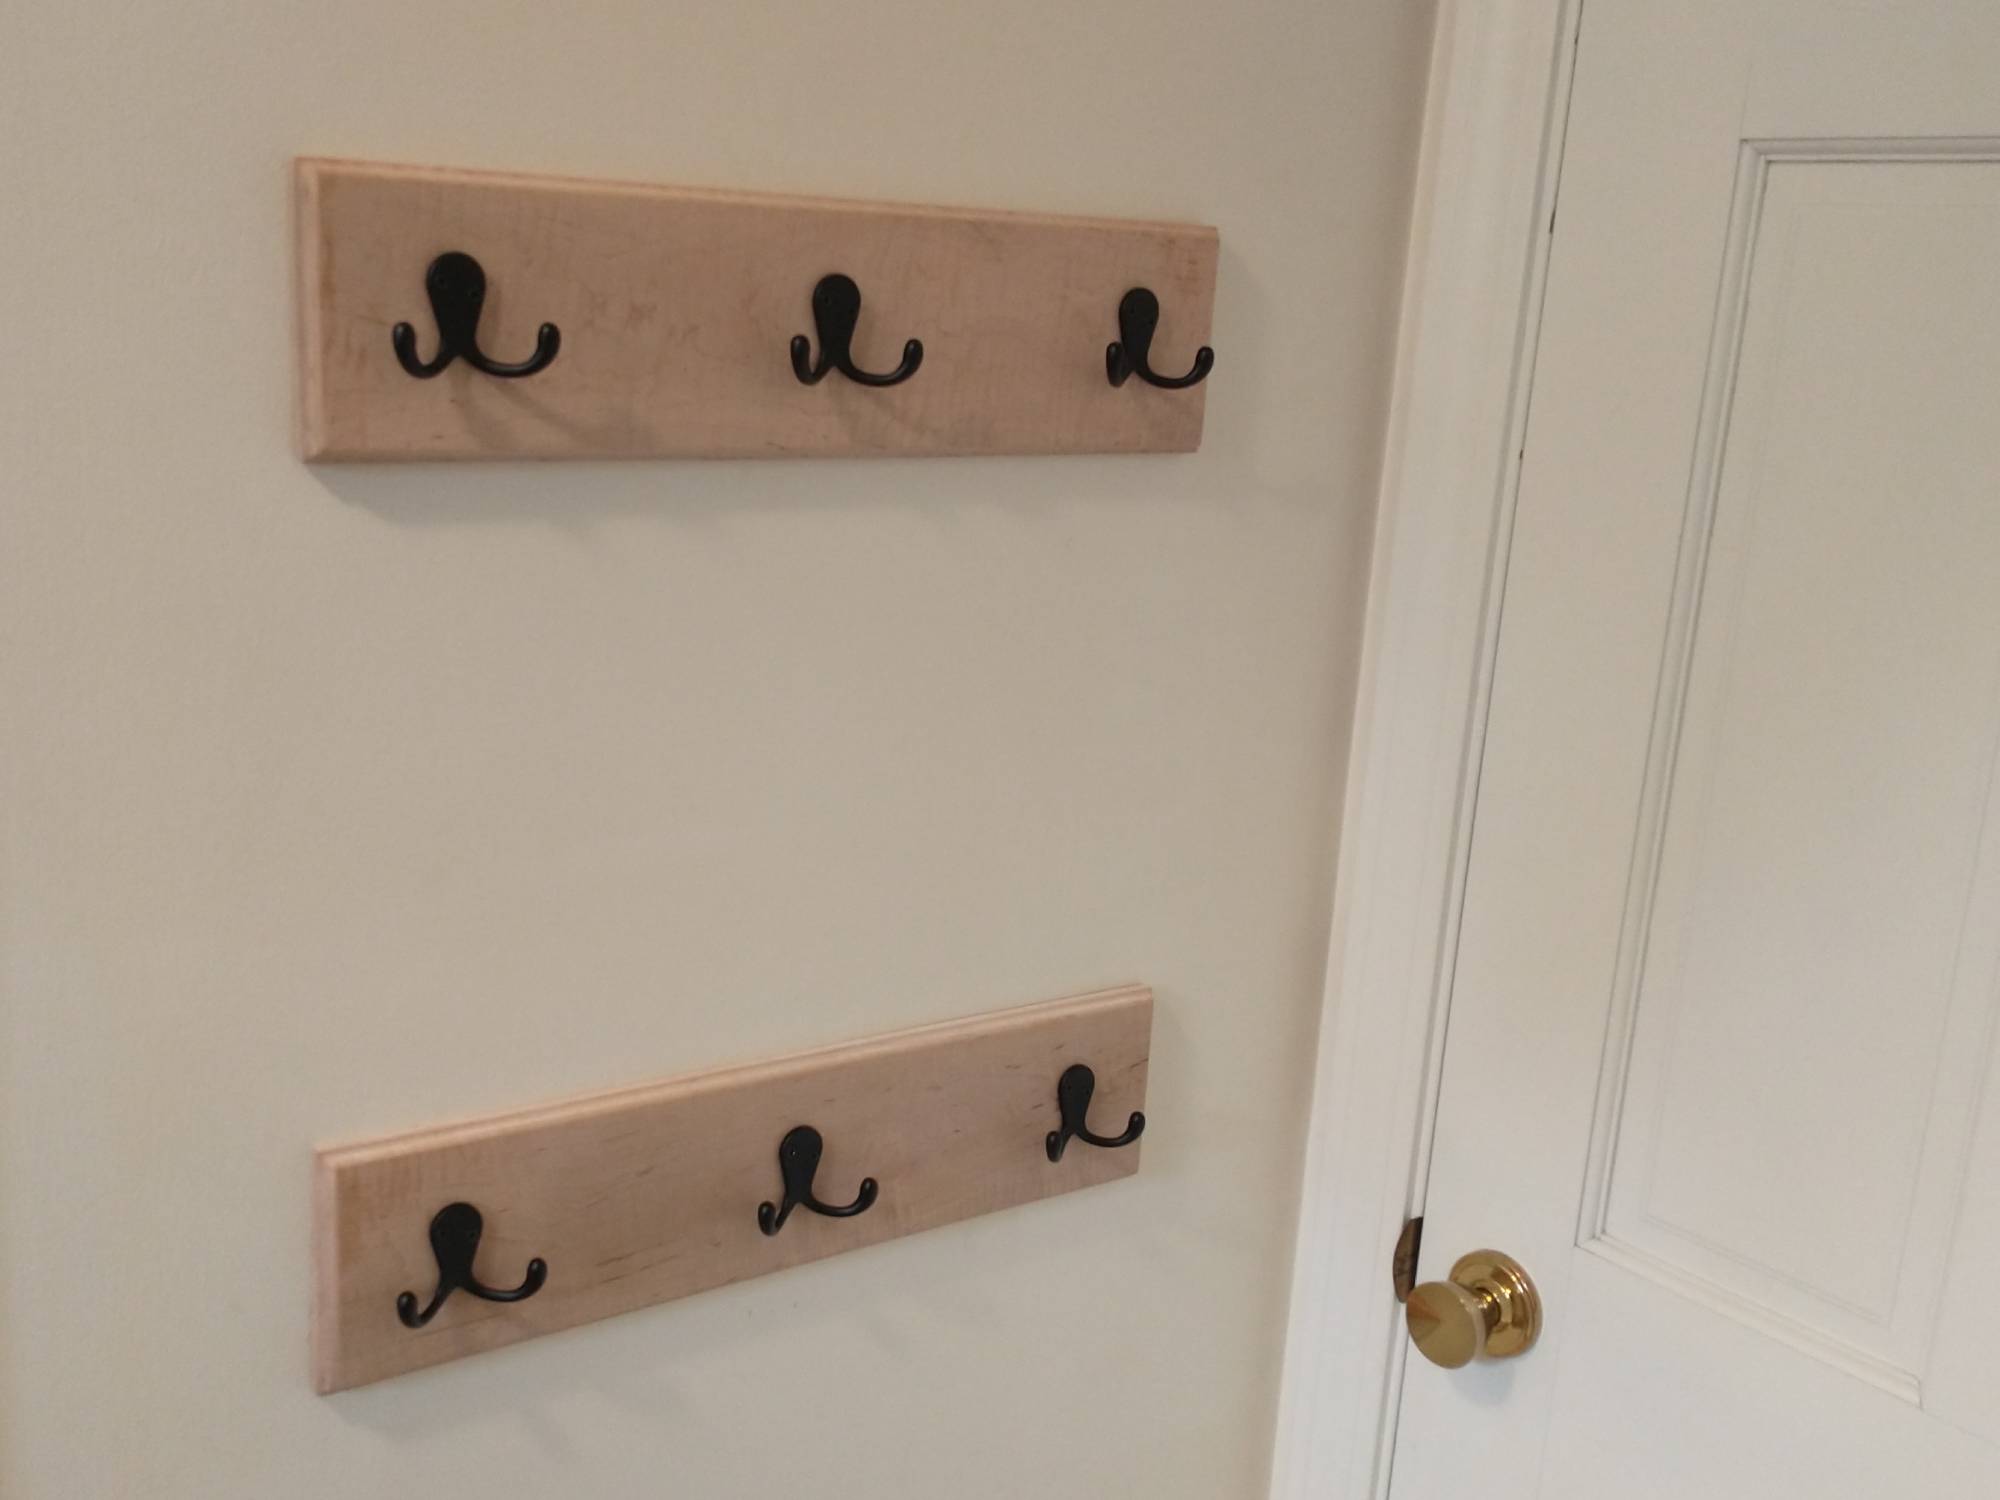 Wood Coat Rack Wall Mount with 5 Tri Metal Coat Hooks for Hanging